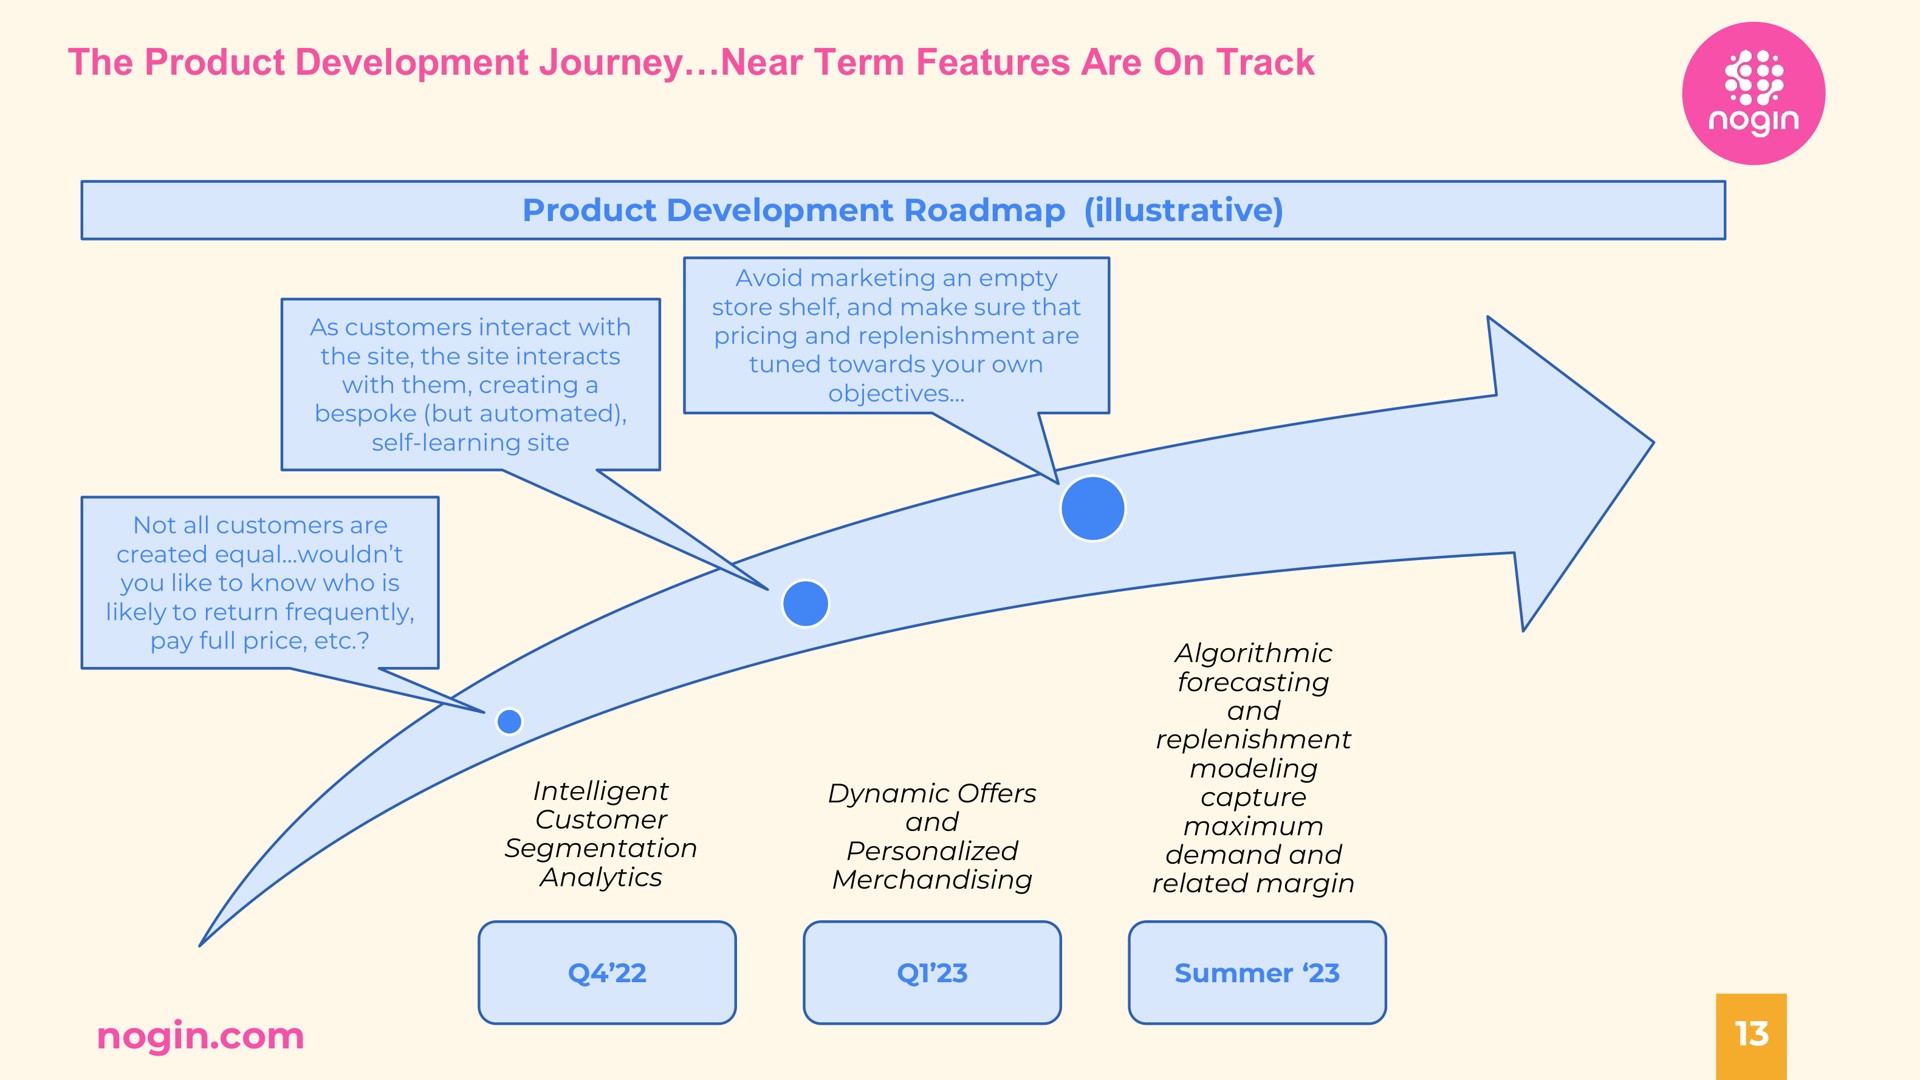 the product development journey near term features are on track product development illustrative as customers interact with the site the site interacts with them creating a bespoke but self learning site avoid marketing an empty store shelf and make sure that pricing and replenishment are tuned towards your own objectives not all customers are created equal you like to know who is likely to return frequently pay full price intelligent customer segmentation analytics dynamic offers and personalized merchandising algorithmic forecasting and replenishment modeling capture maximum demand and related margin summer | Nogin